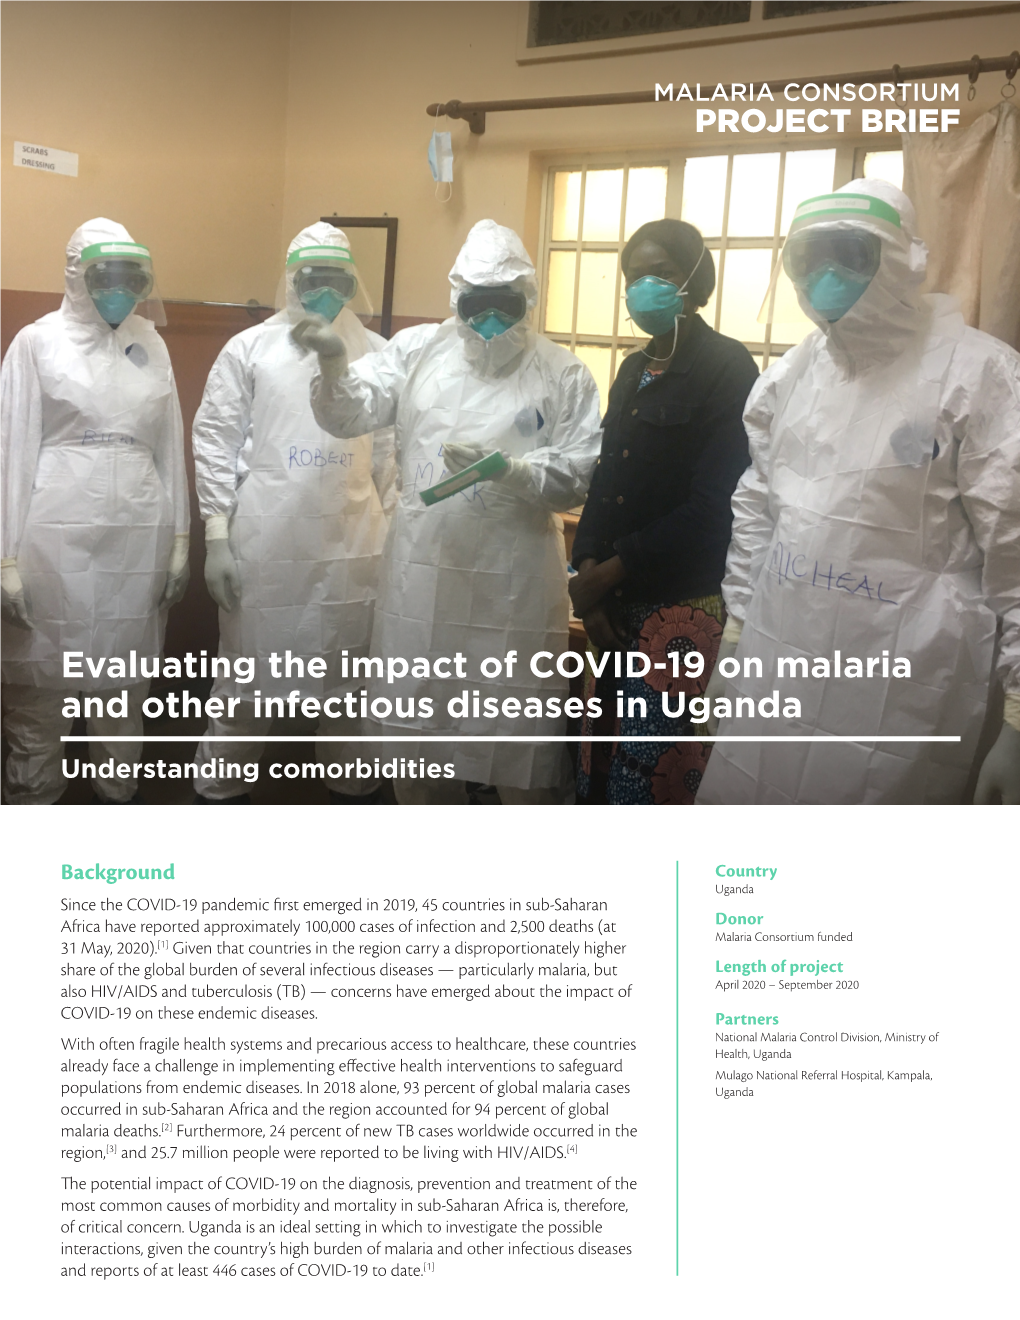 Evaluating the Impact of COVID-19 on Malaria and Other Infectious Diseases in Uganda